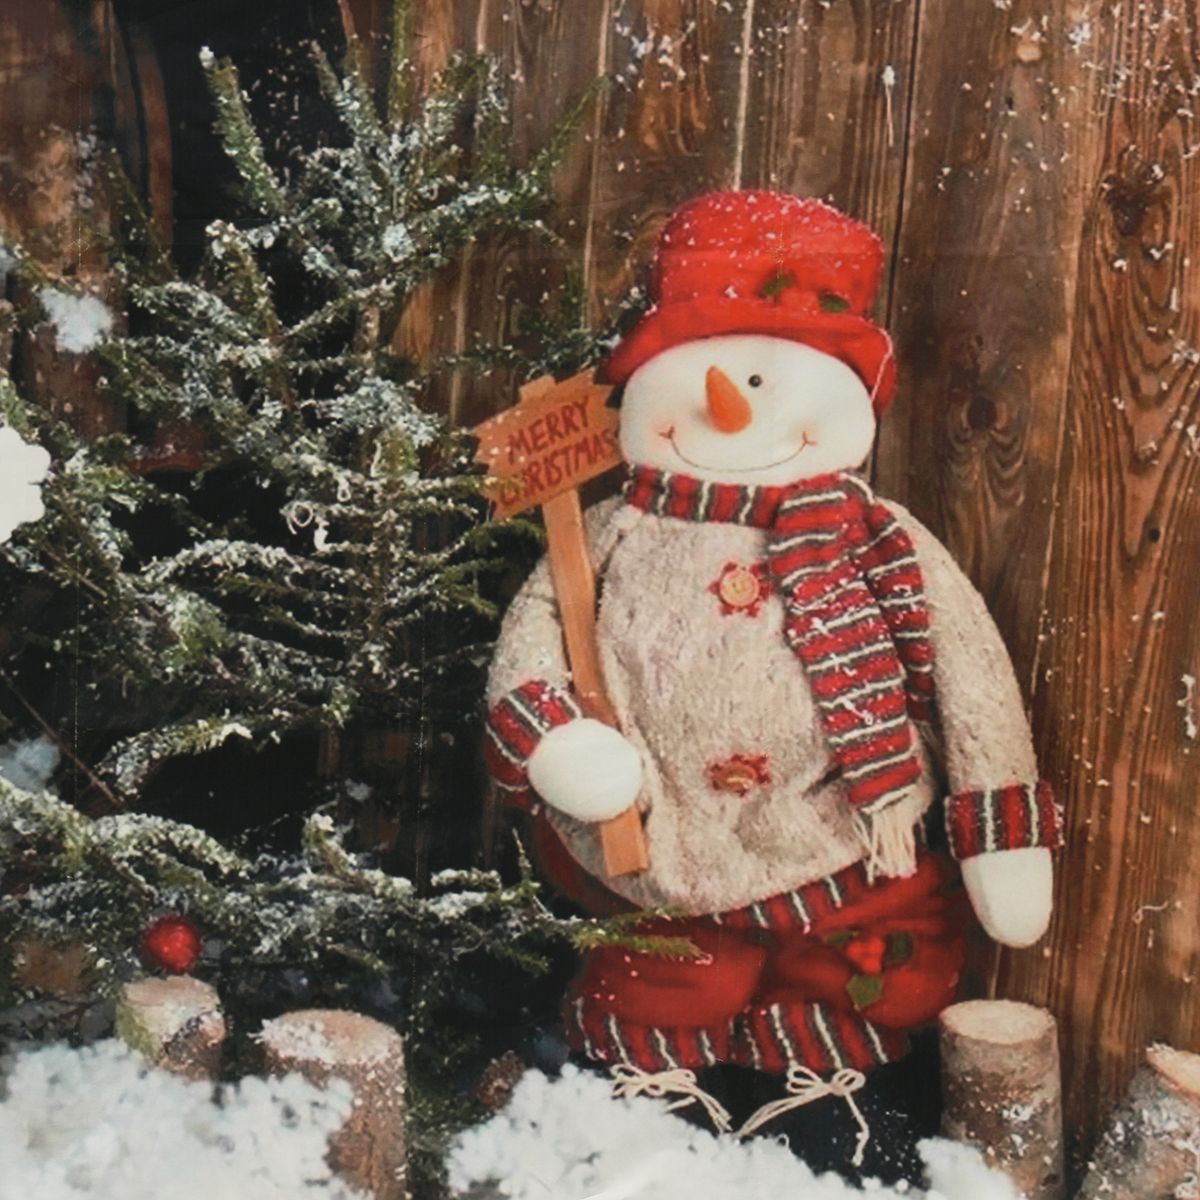 7x5FT-Christmas-Snowman-Wooden-Wall-Outdoor-Photography-Backdrop-Studio-Prop-Background-1236493